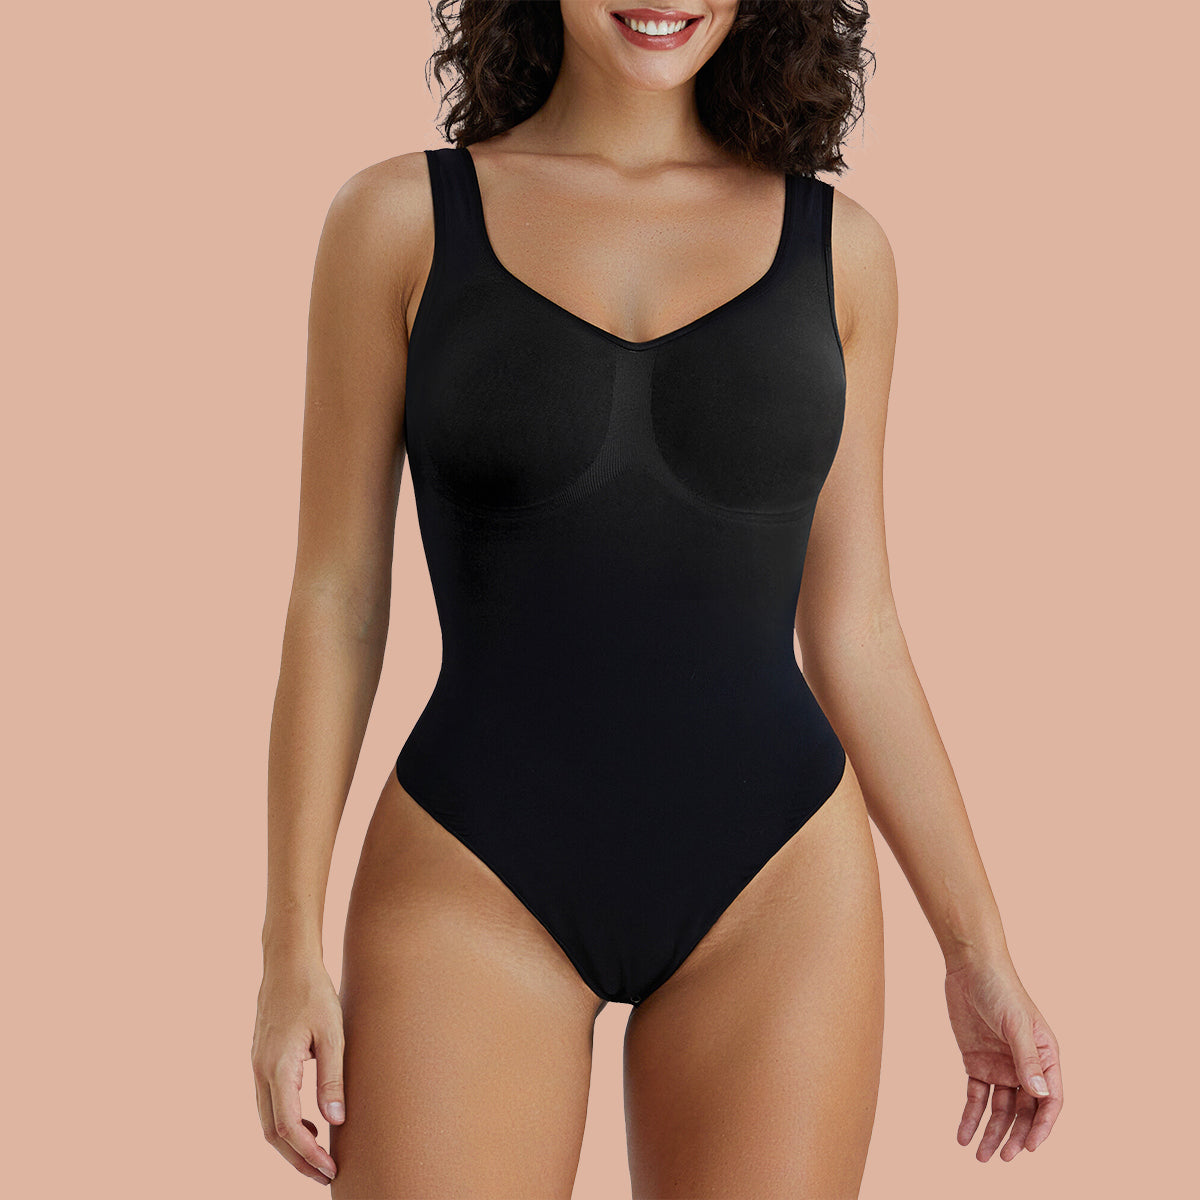 Womens Strapless Seamless Body Shaper Thong Shapewear With Full Control And  Seamless Corset Underwear From Diao07, $15.09